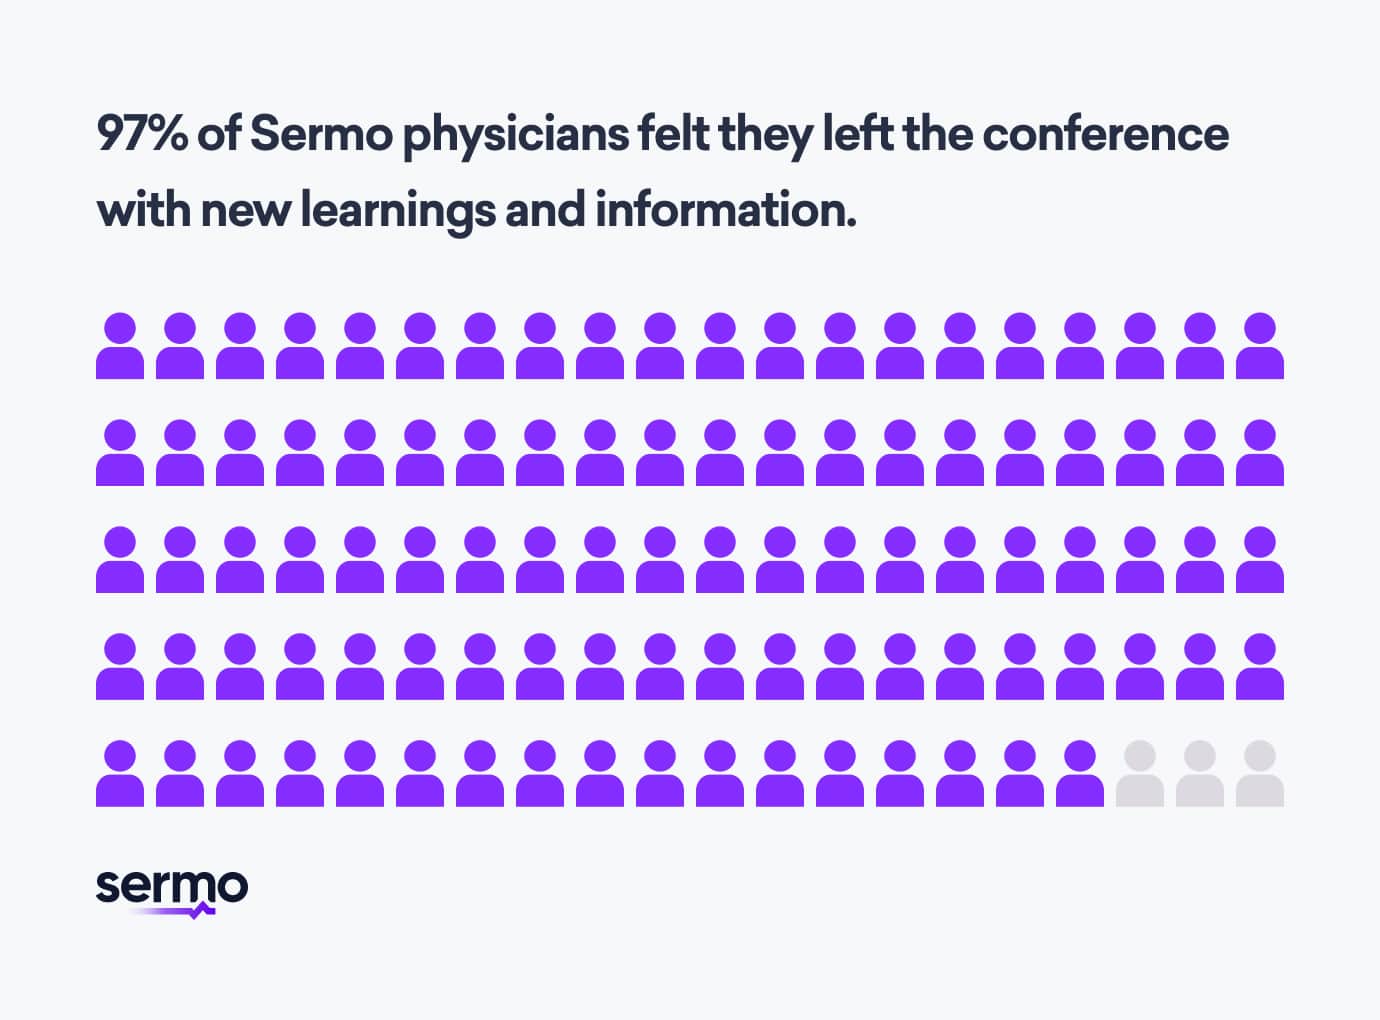 visualization of 97% of Sermo physicians felt they left the ASCO conference with new learnings and information